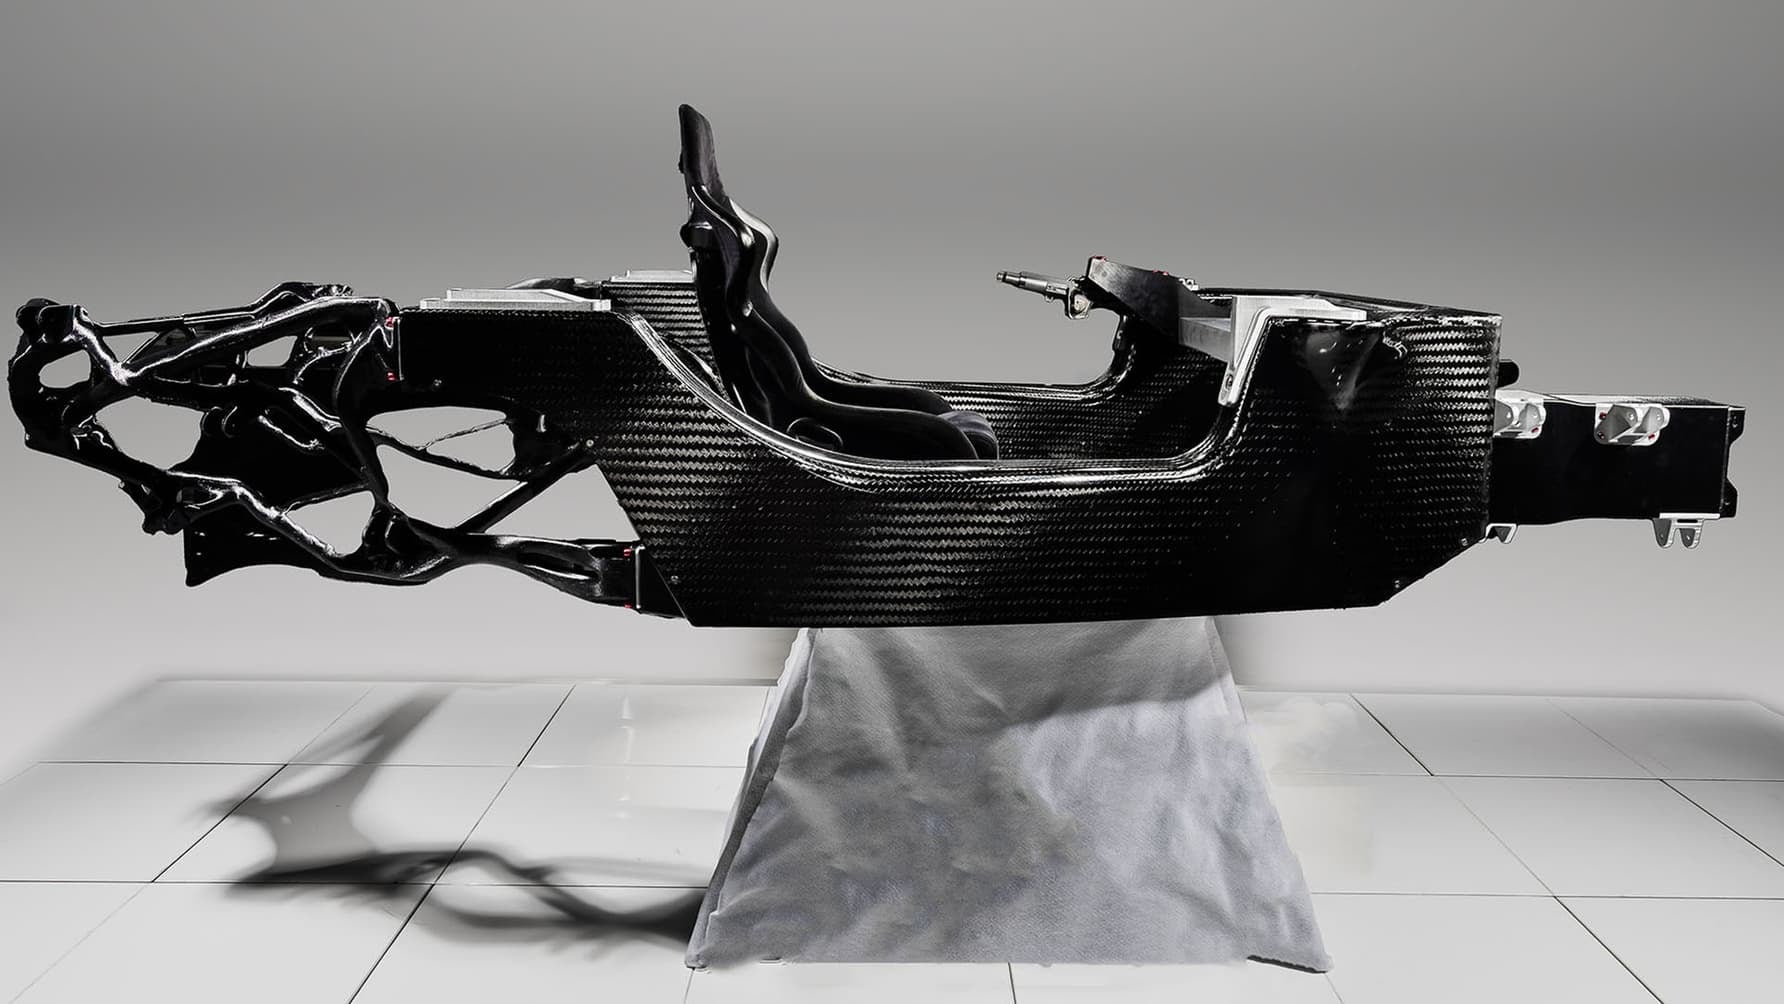 Supplier of F1 Launches $38K Carbon Fiber Chassis for Your Dream Car Project